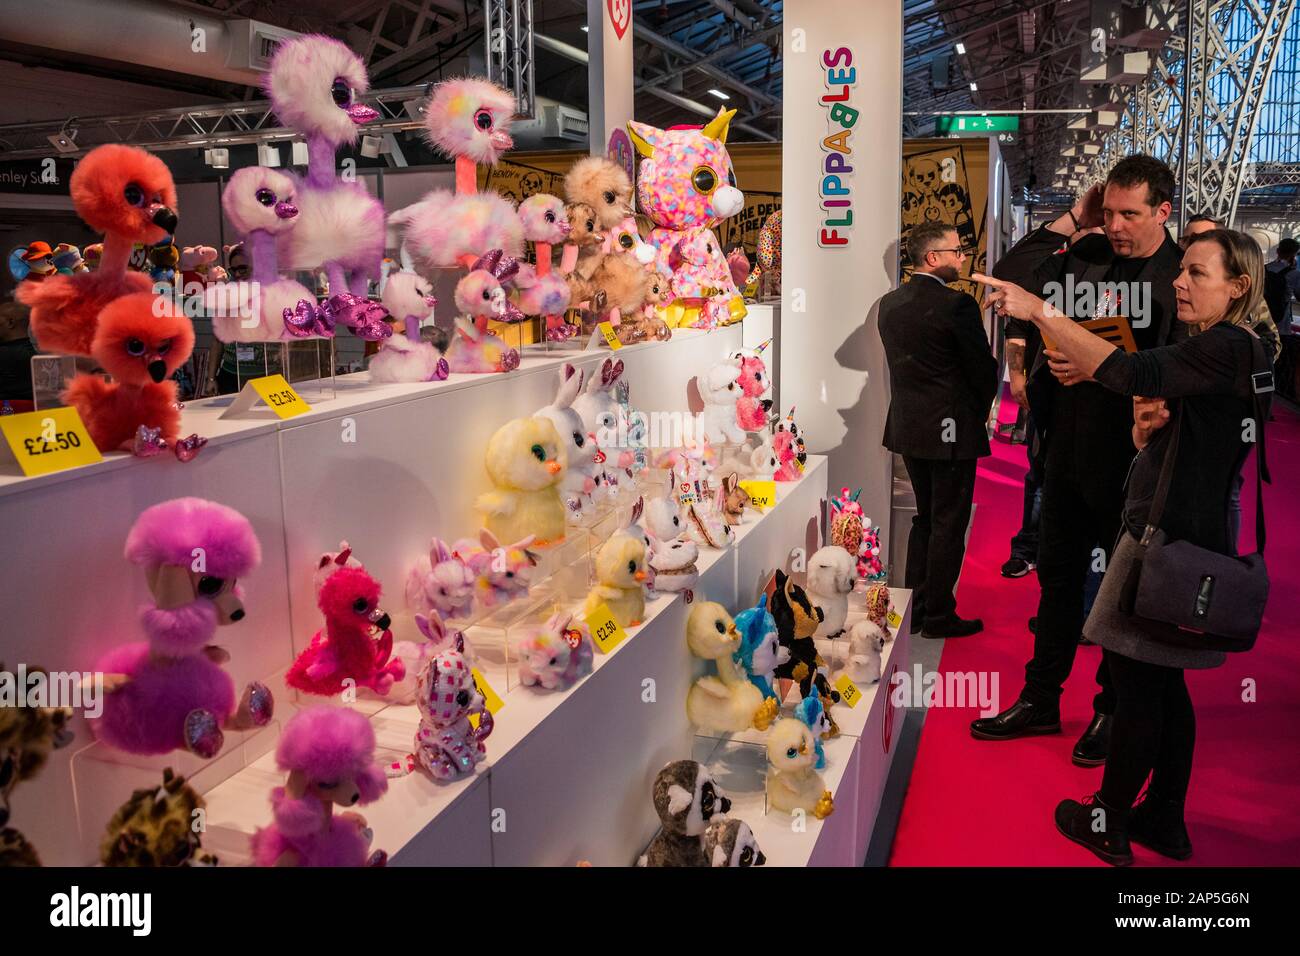 London, UK. 21st Jan 2020. Beanie Boos from Ty toys - The Toy fair opens at London's Olympia exhibition centre, organised by the British Toy & Hobby Association. Credit: Guy Bell/Alamy Live News Stock Photo